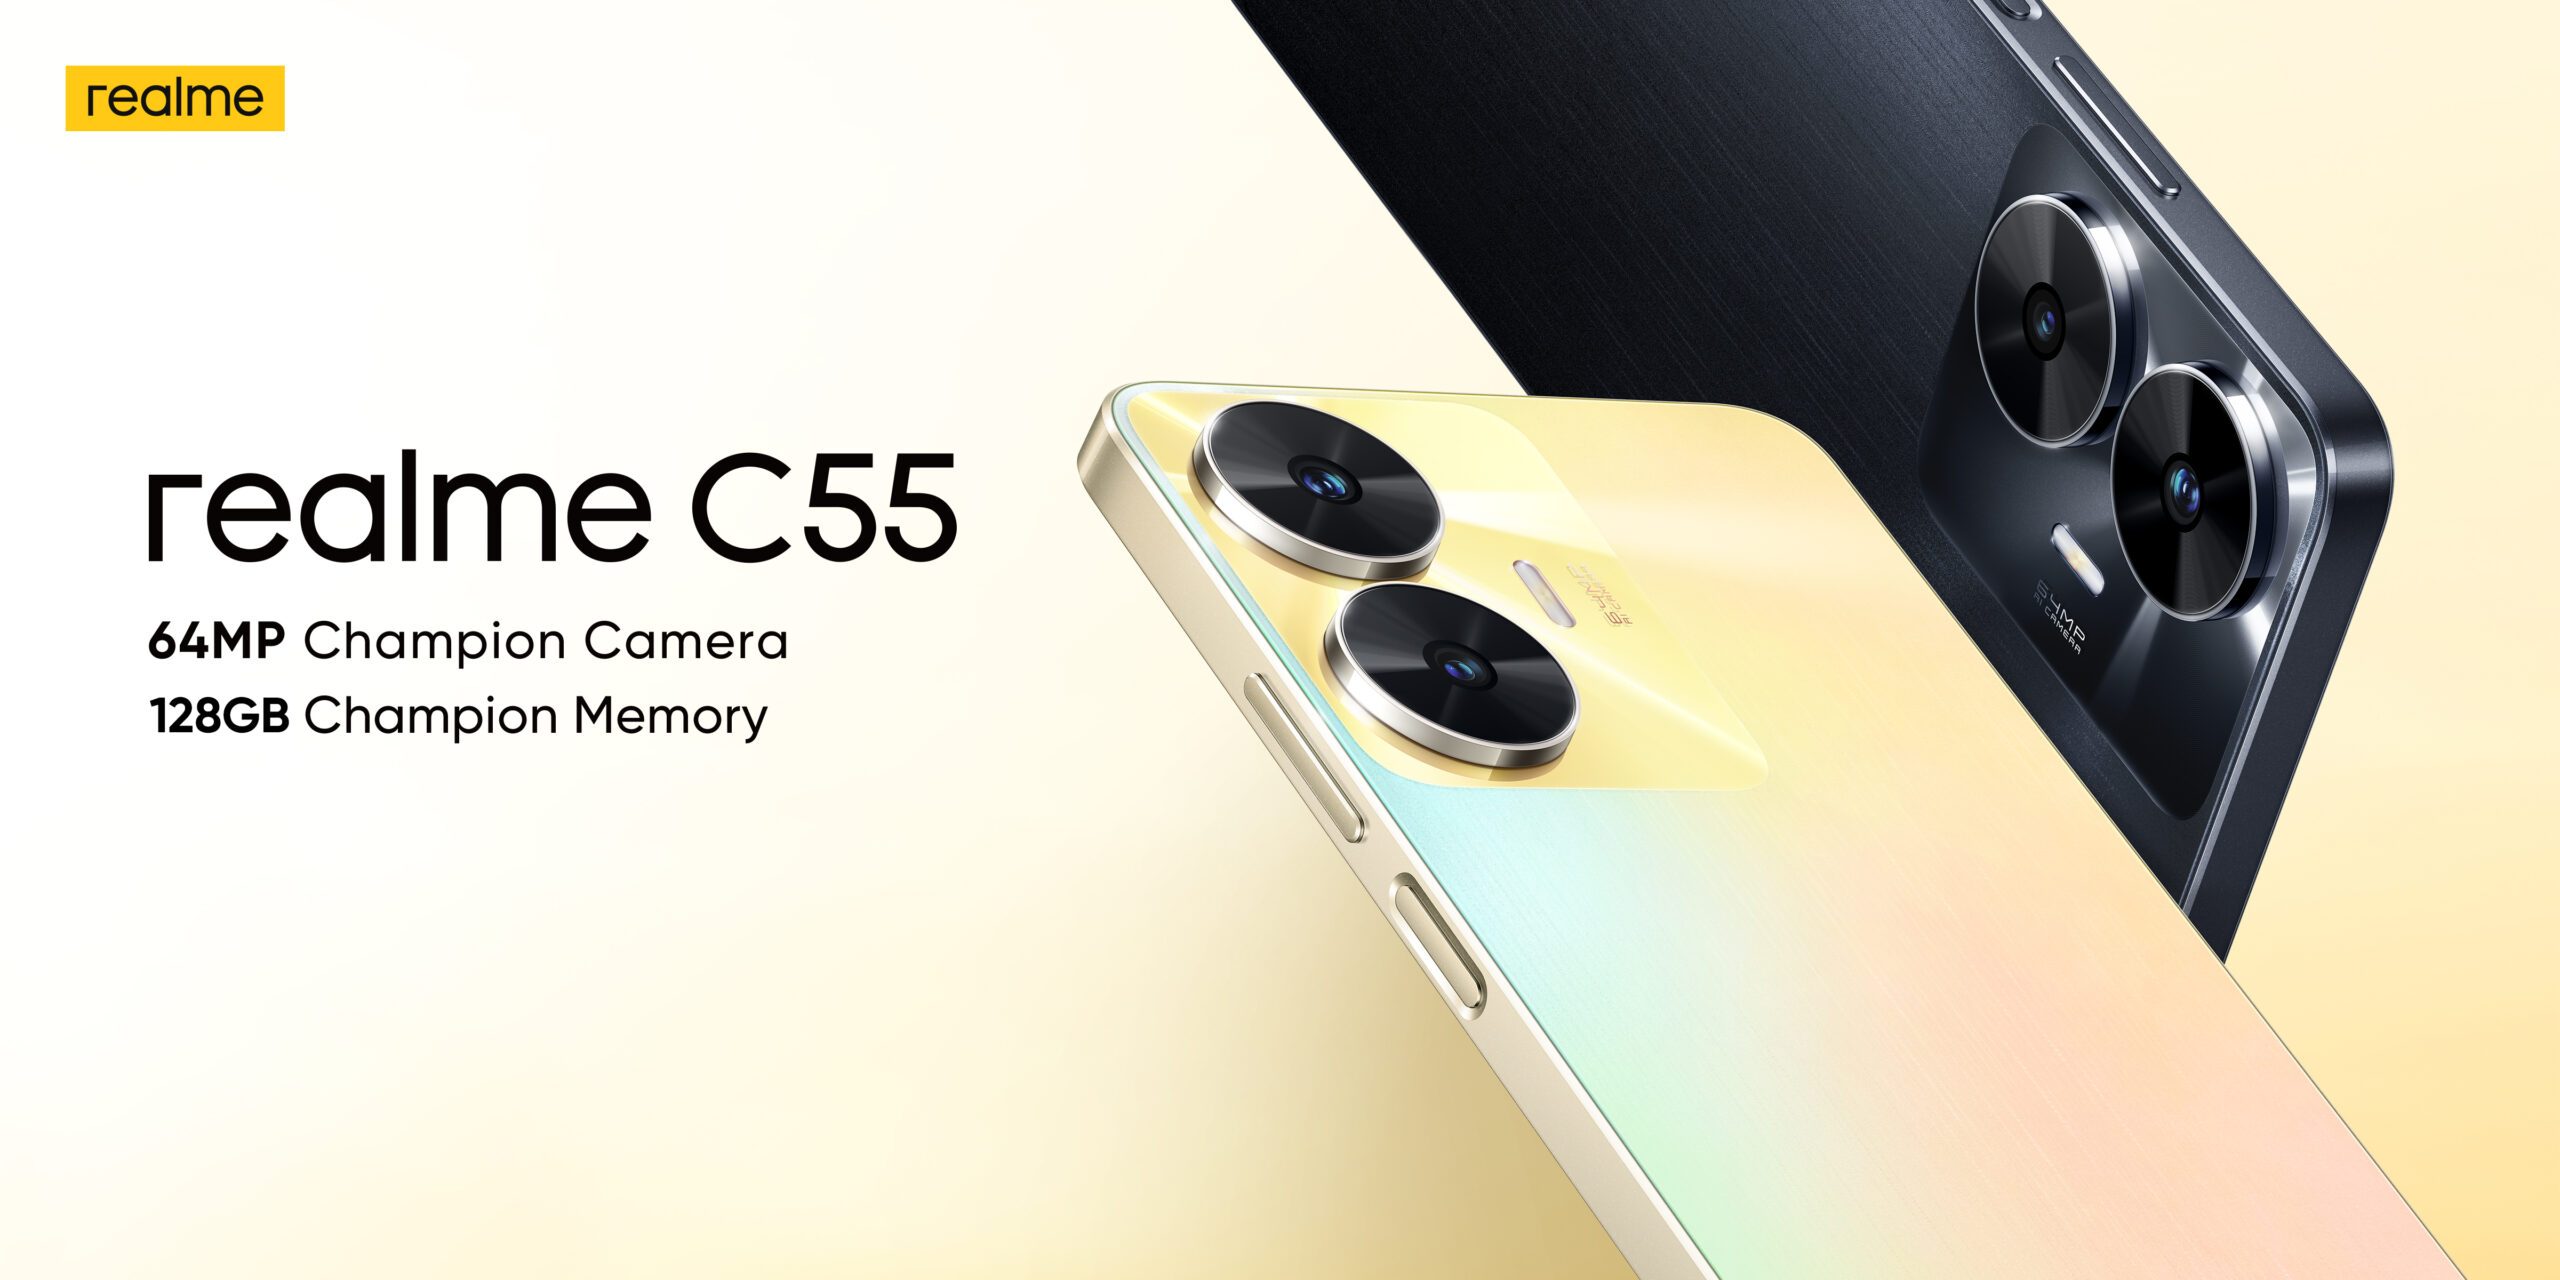 realme launches World’s first mini capsule display for Android- realme C55 with 33W fast charging & 64MP Camera